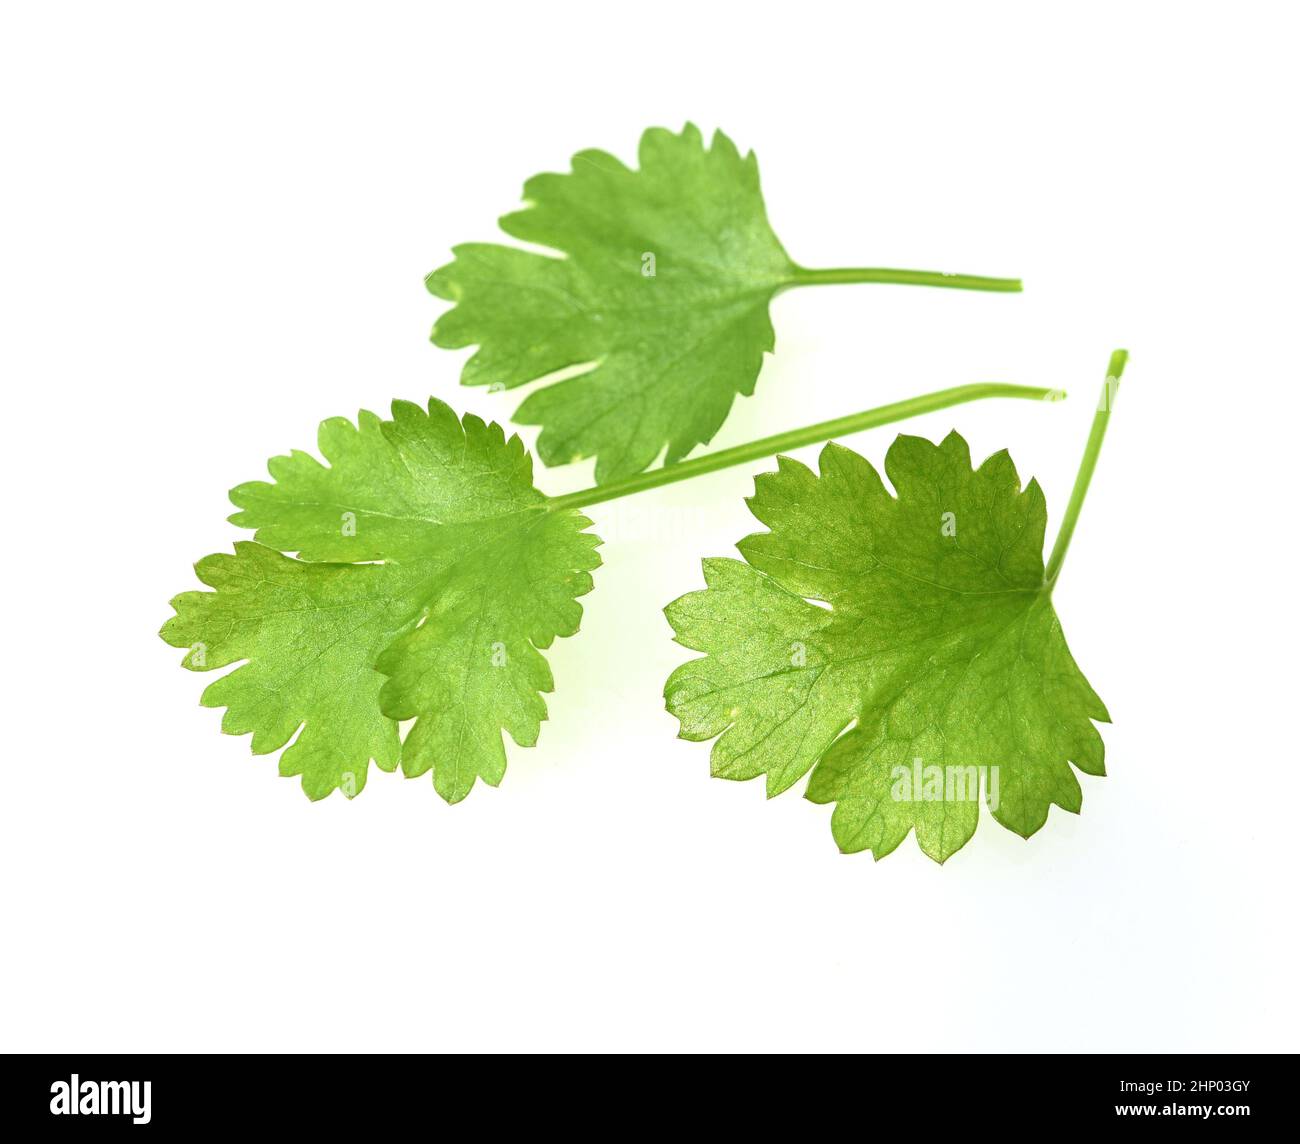 Coriander, Coriandrum sativum, is an important medicinal and herb plant. Stock Photo